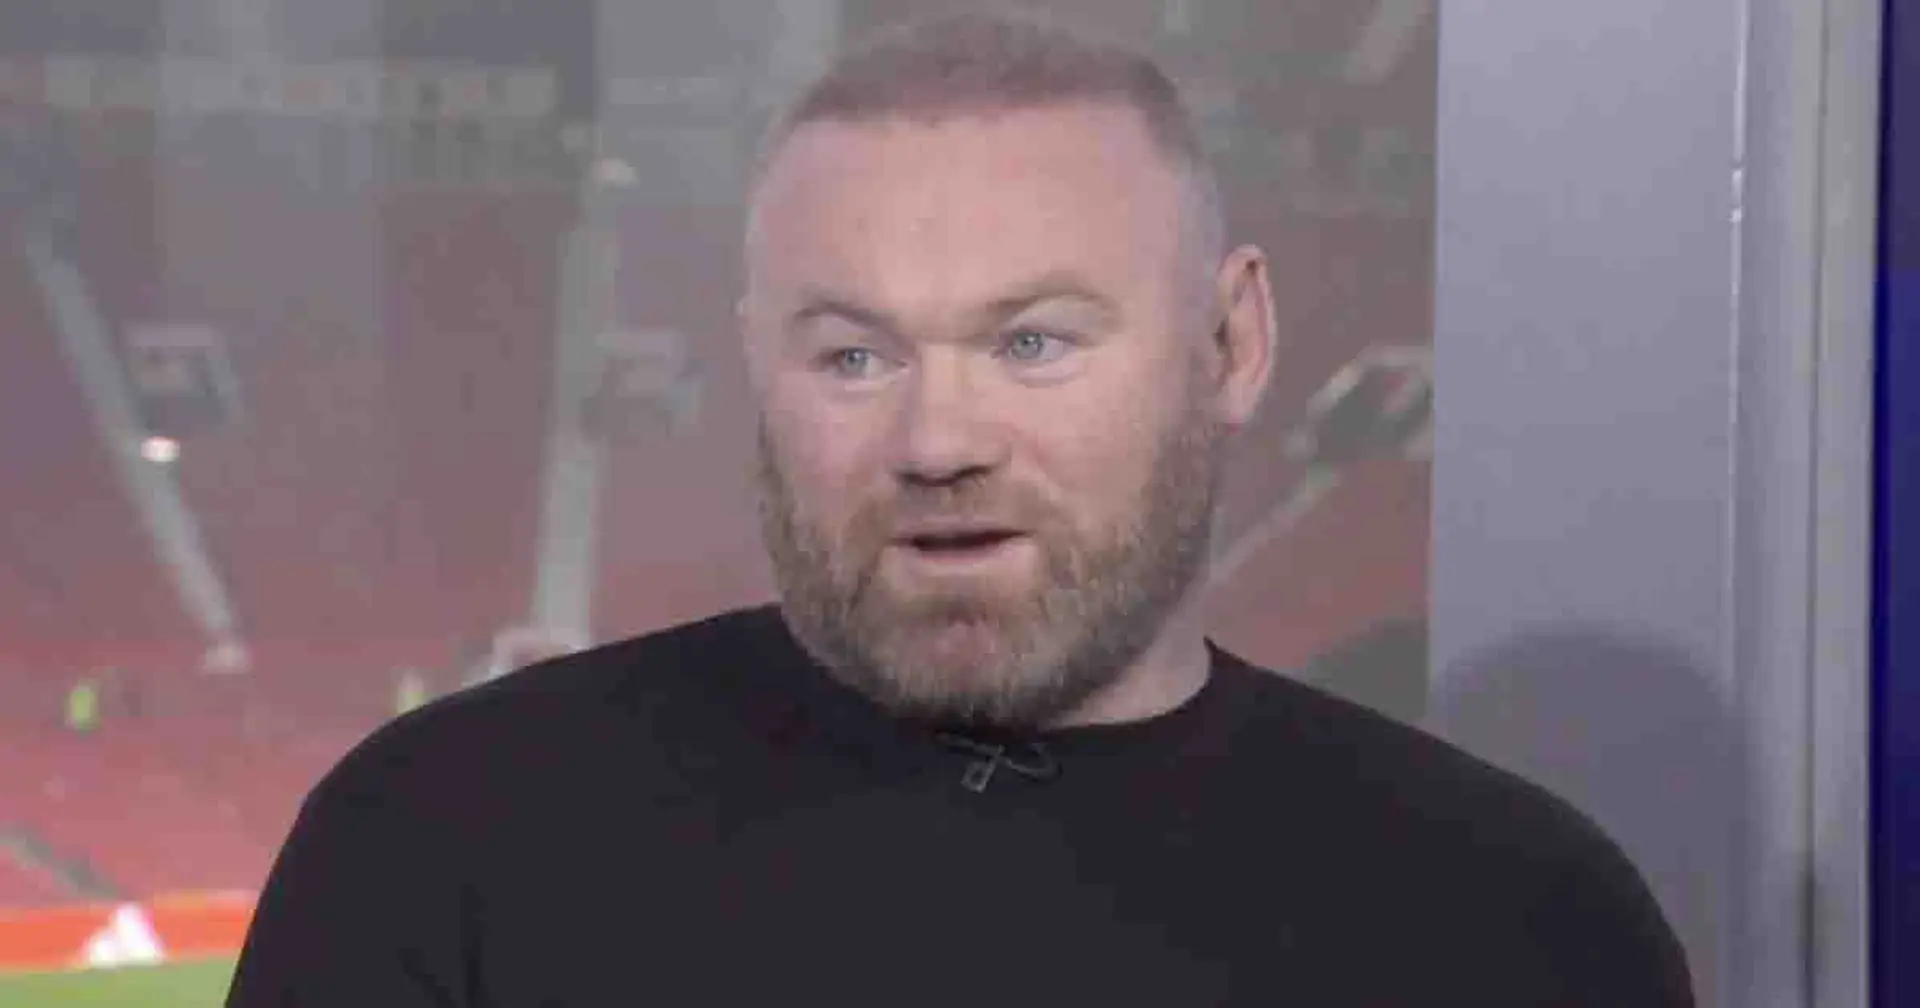 Wayne Rooney hints at Man United players faking injuries: 'Some of them are fit to play'